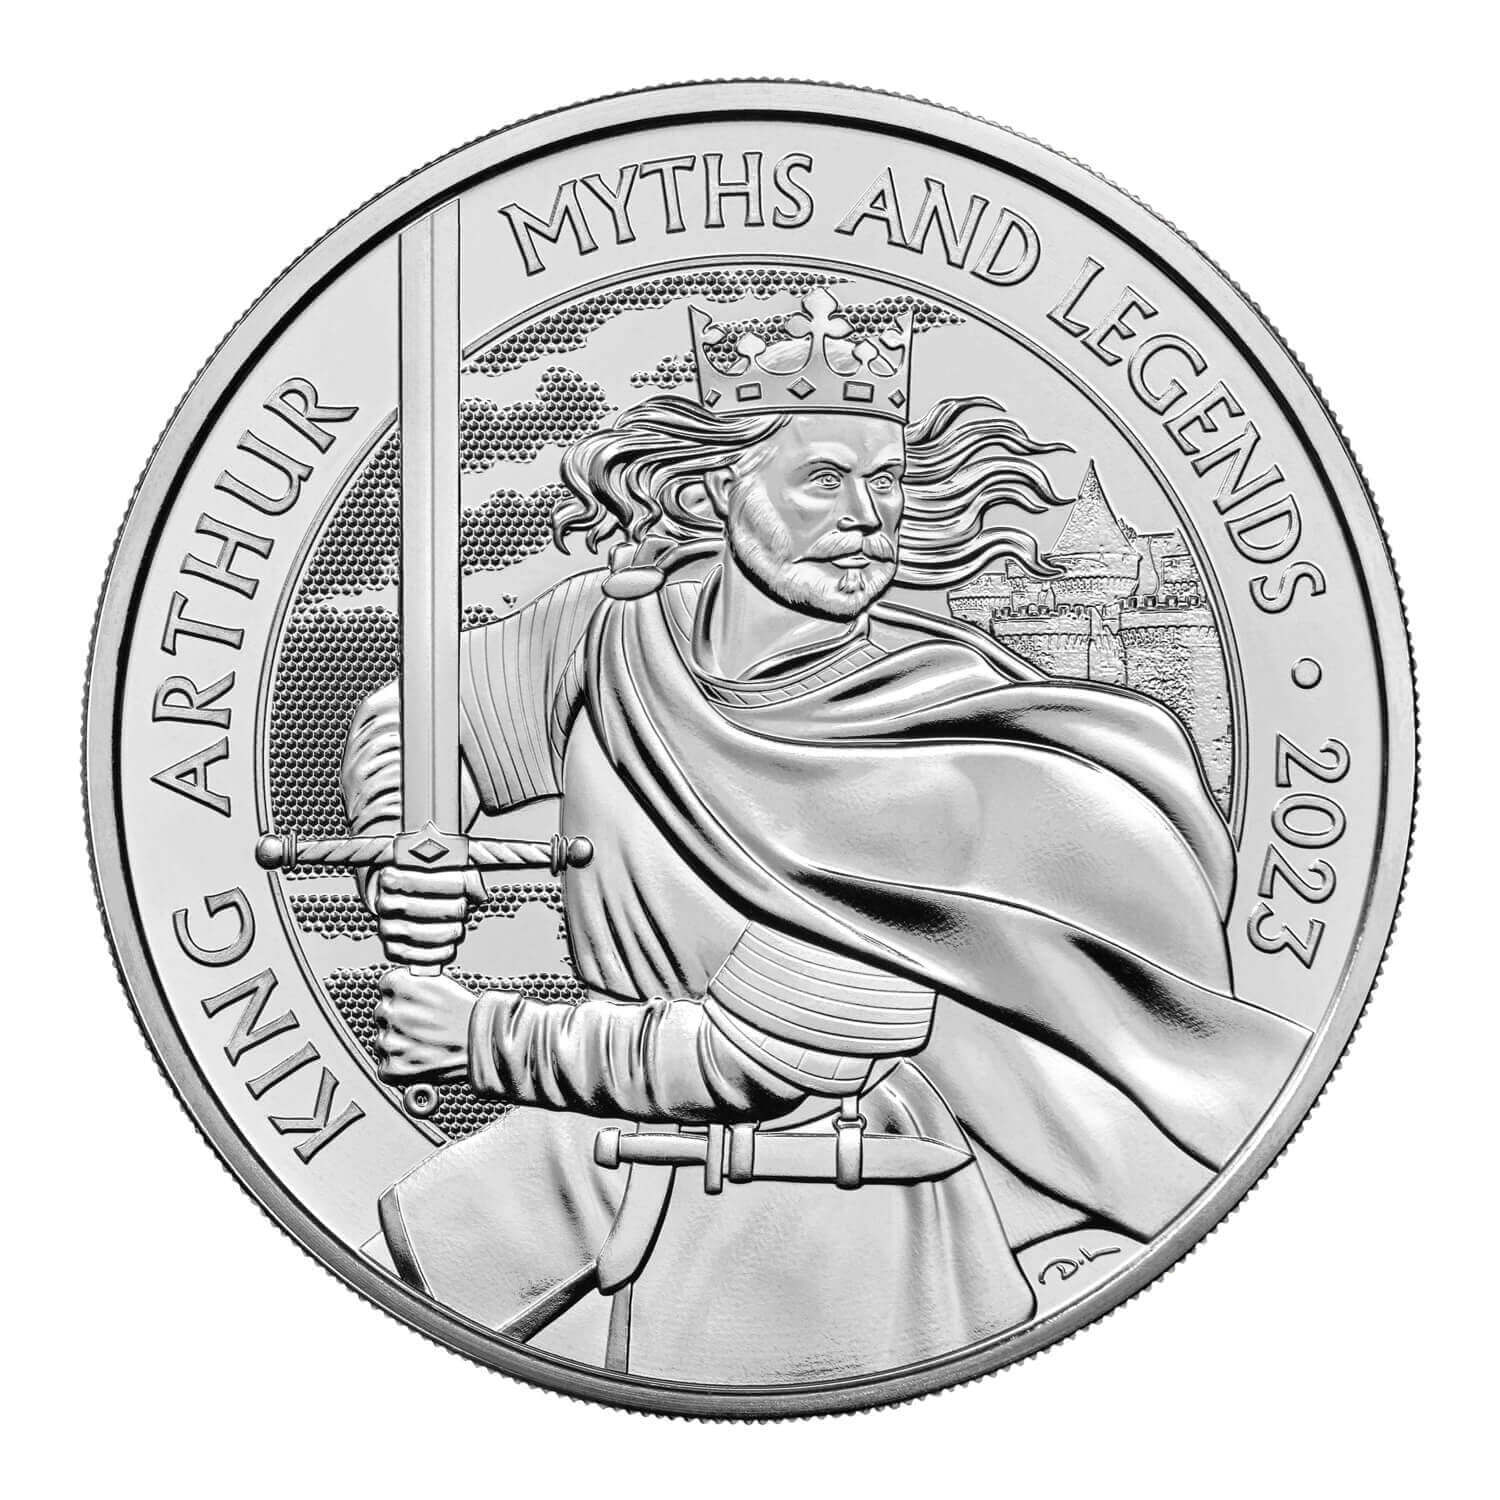 2023 £5 Myths and Legends - King Arther BUNC Coin